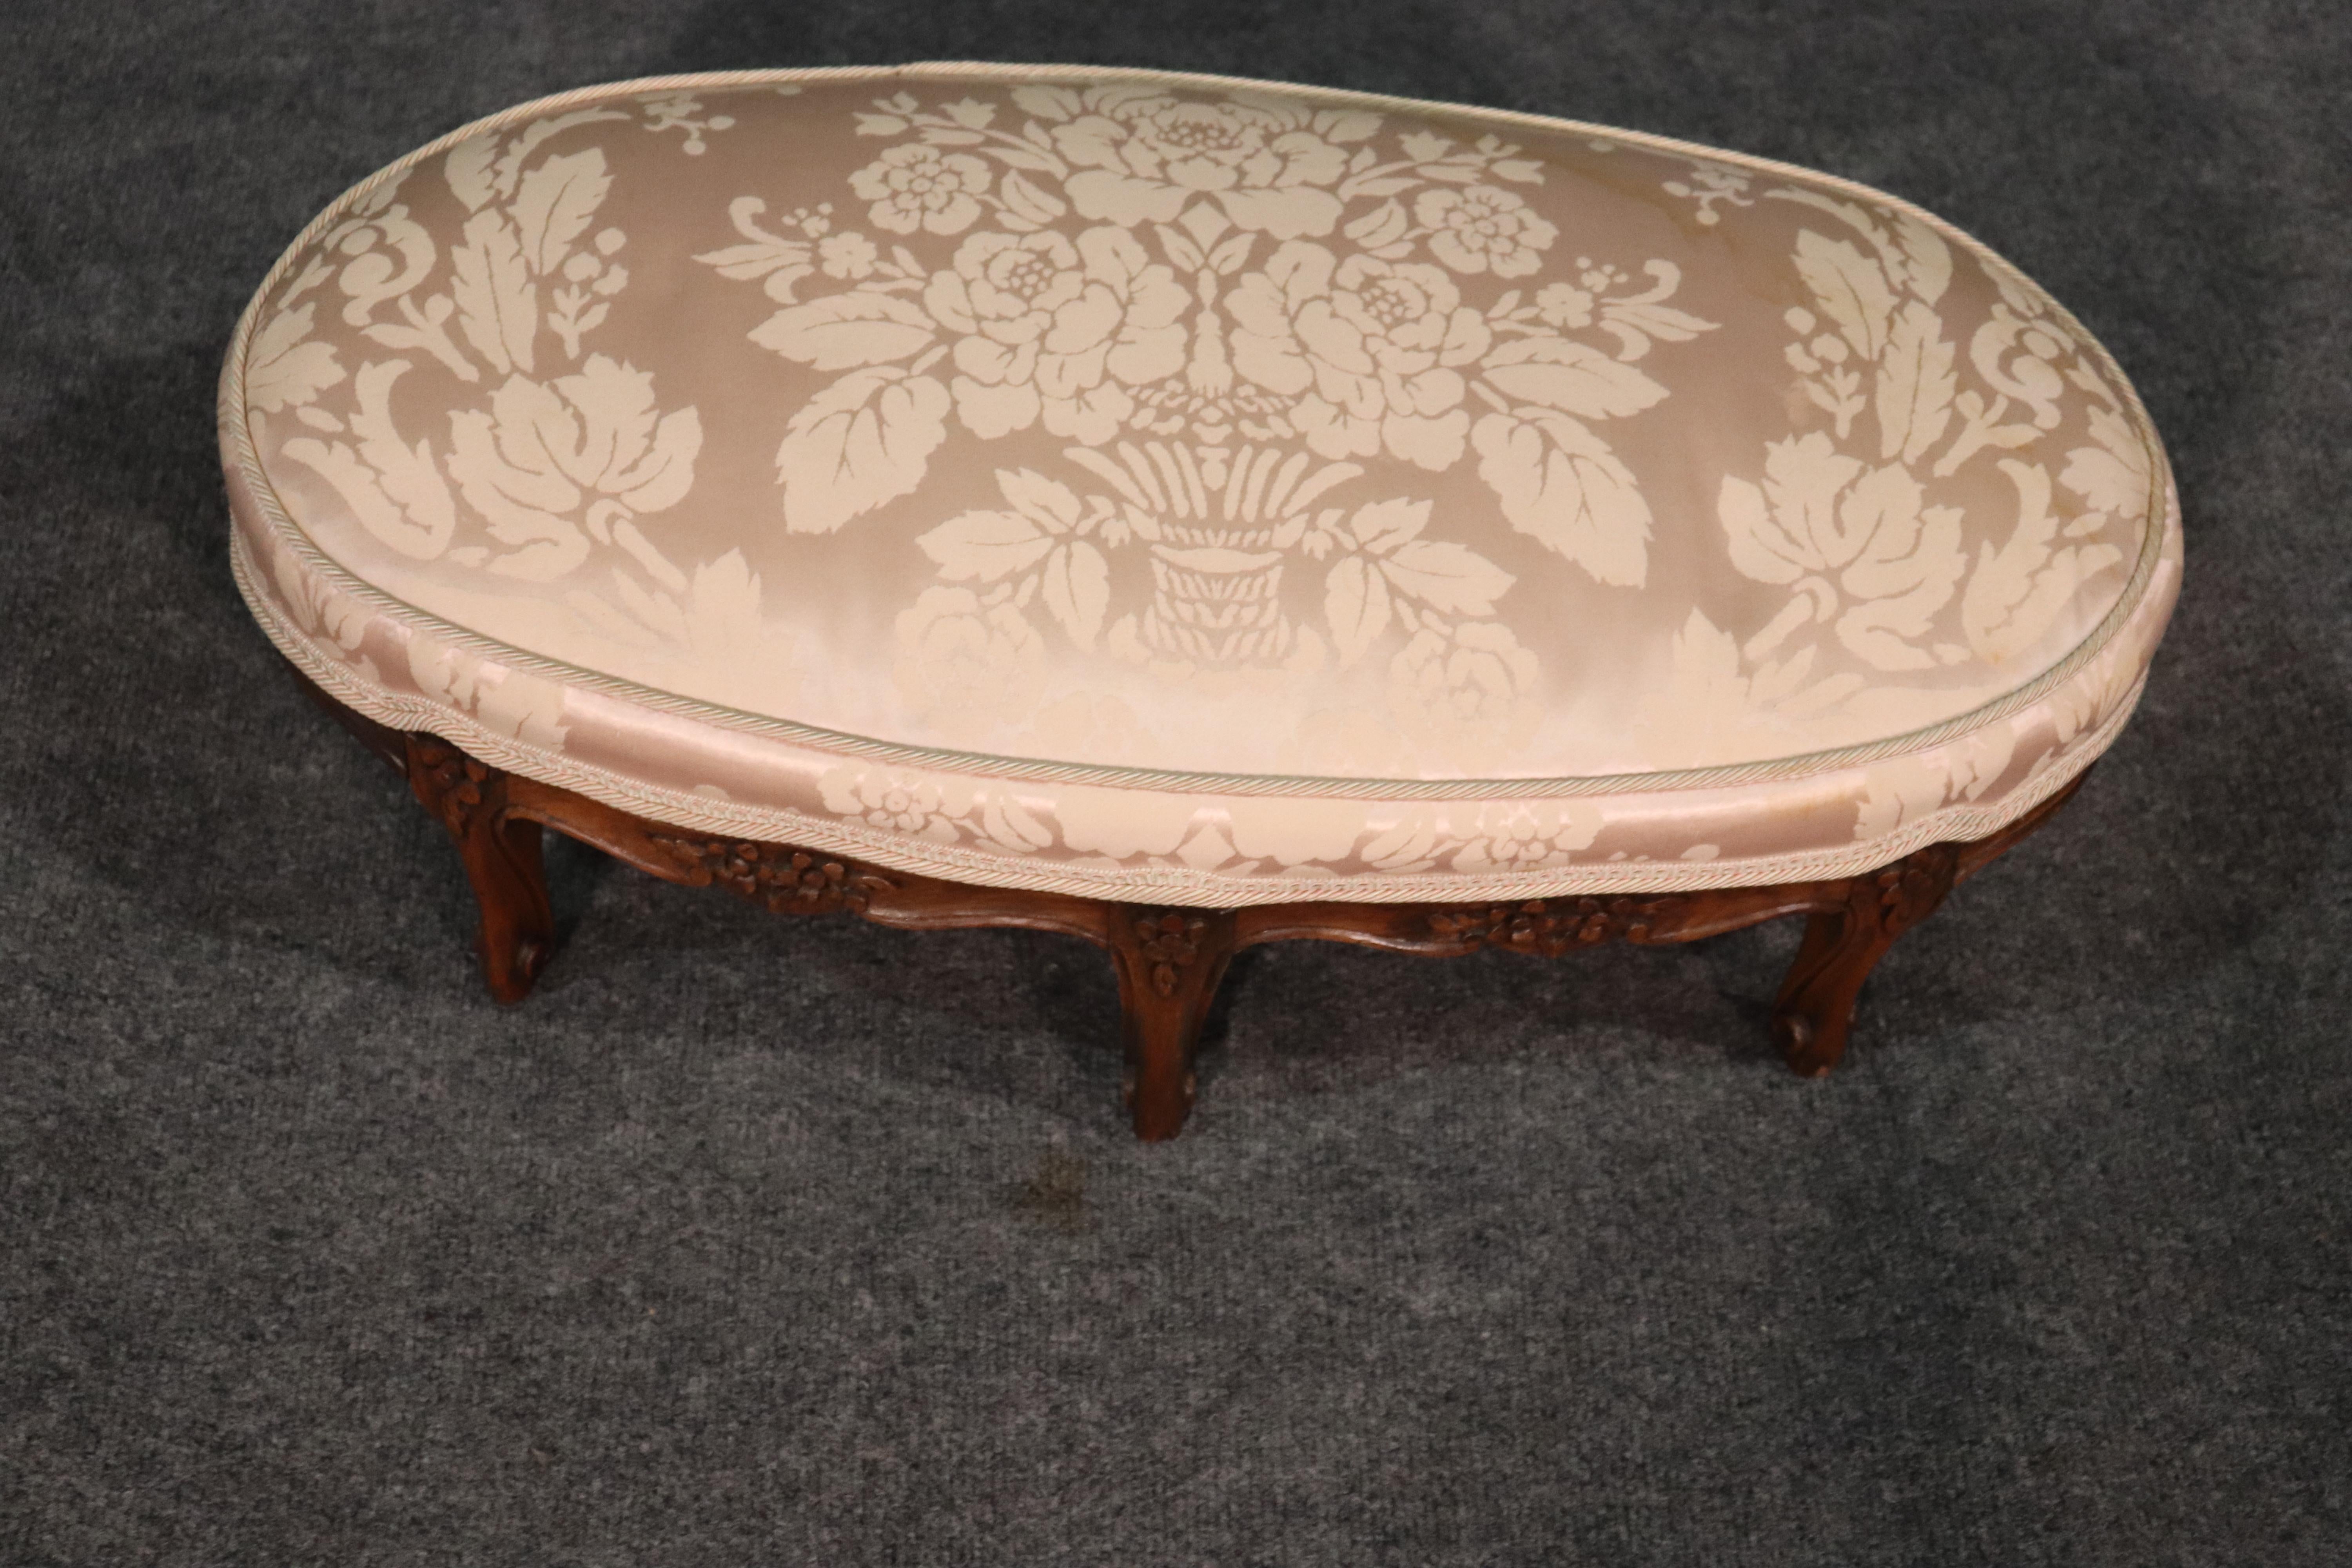 This is a fine quality 19th century French carved Louis XV stool. The stool measures only 26 wide x 14 wide x 8 inches tall. The fantastic silk upholstery is in a beautiful soft pink hue and does have a visible stain. The frame is in very good